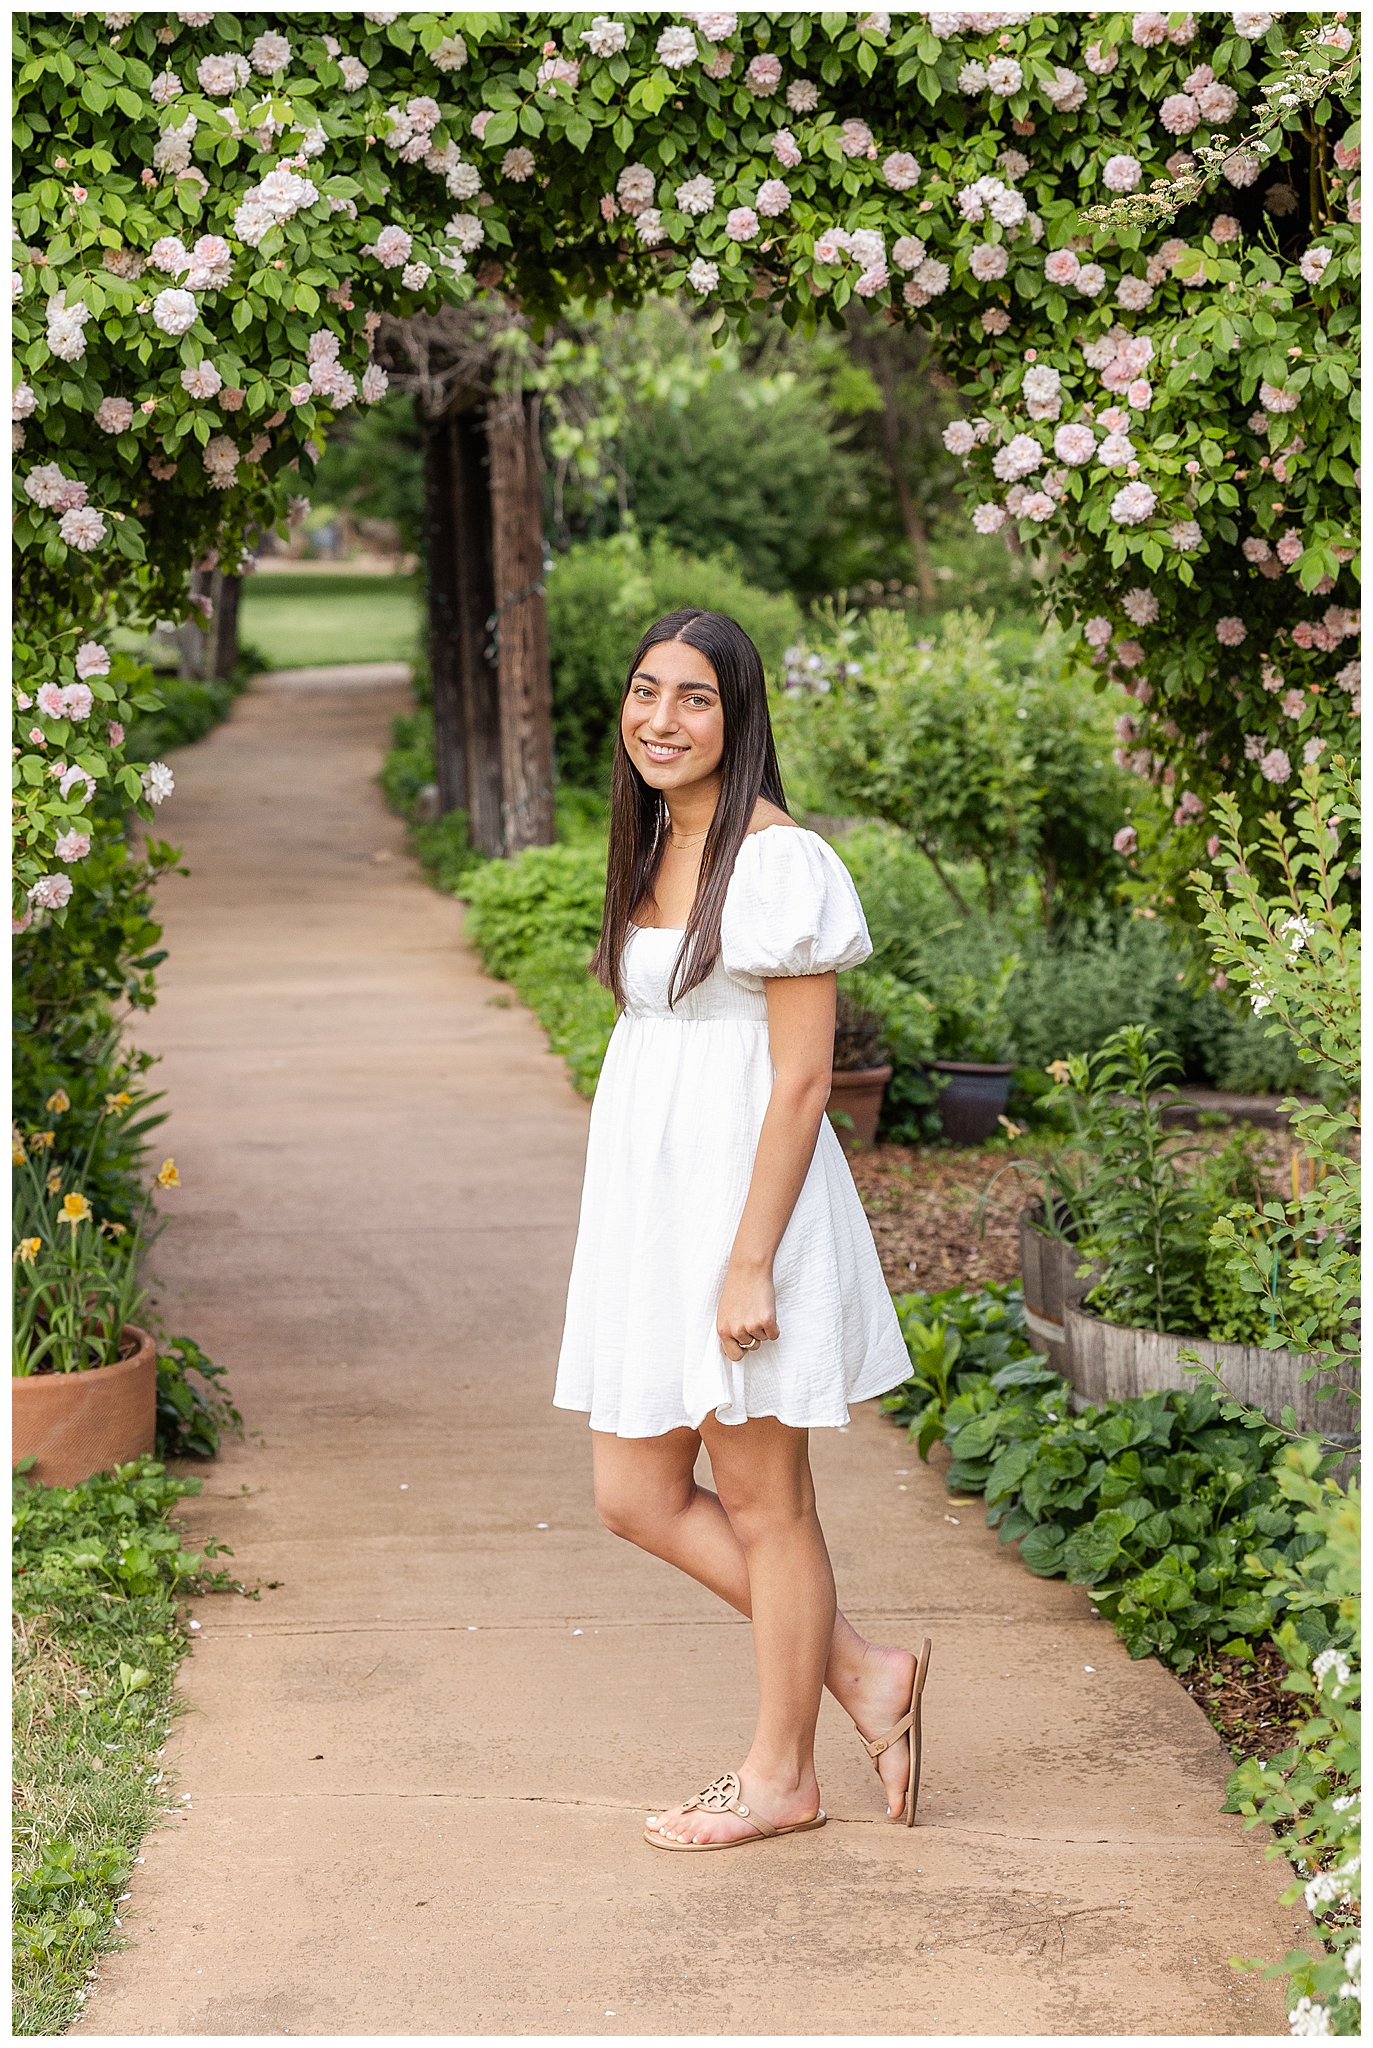 White Ranch Events Senior Girl Portriats Willow Tree Family Spring May Roses Pond,